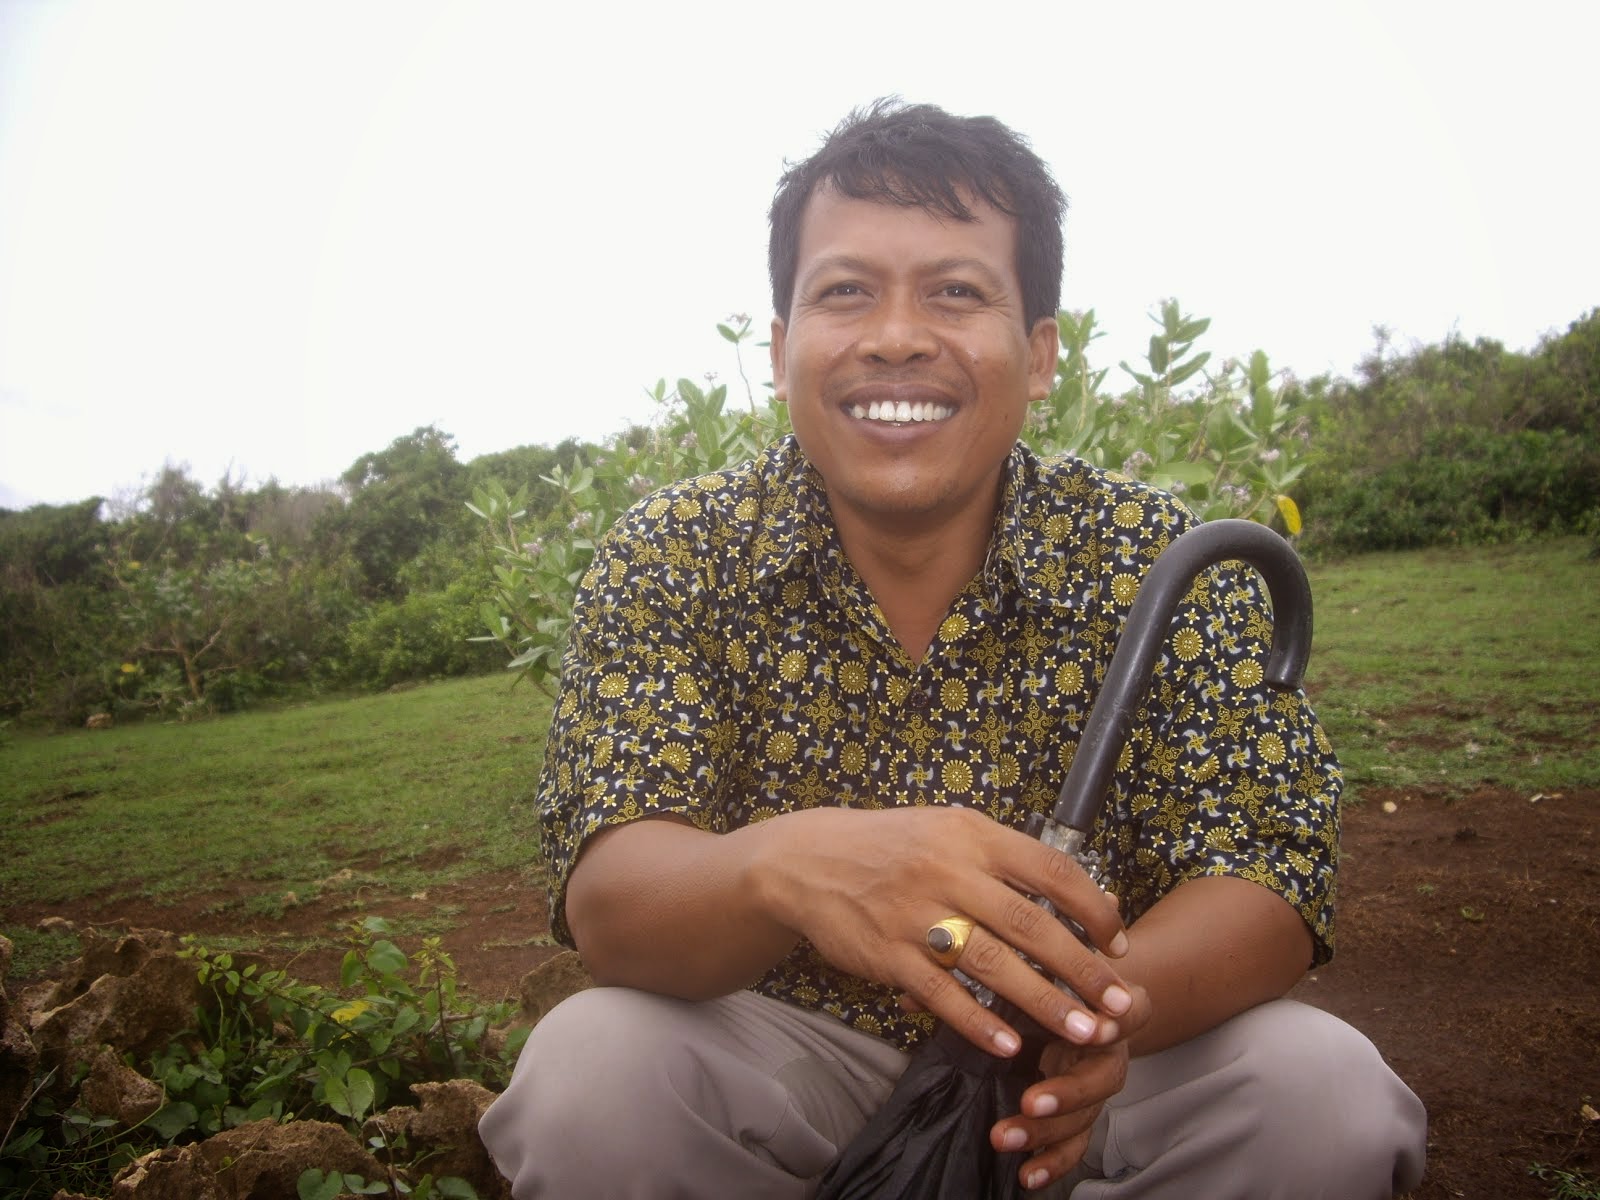 KASENA GUIDED ME THROUGH THE COUNTRYSIDE OF PEACEFUL, UPSCALE  CANGGU ON A LAND-BUYING EXPEDITION.